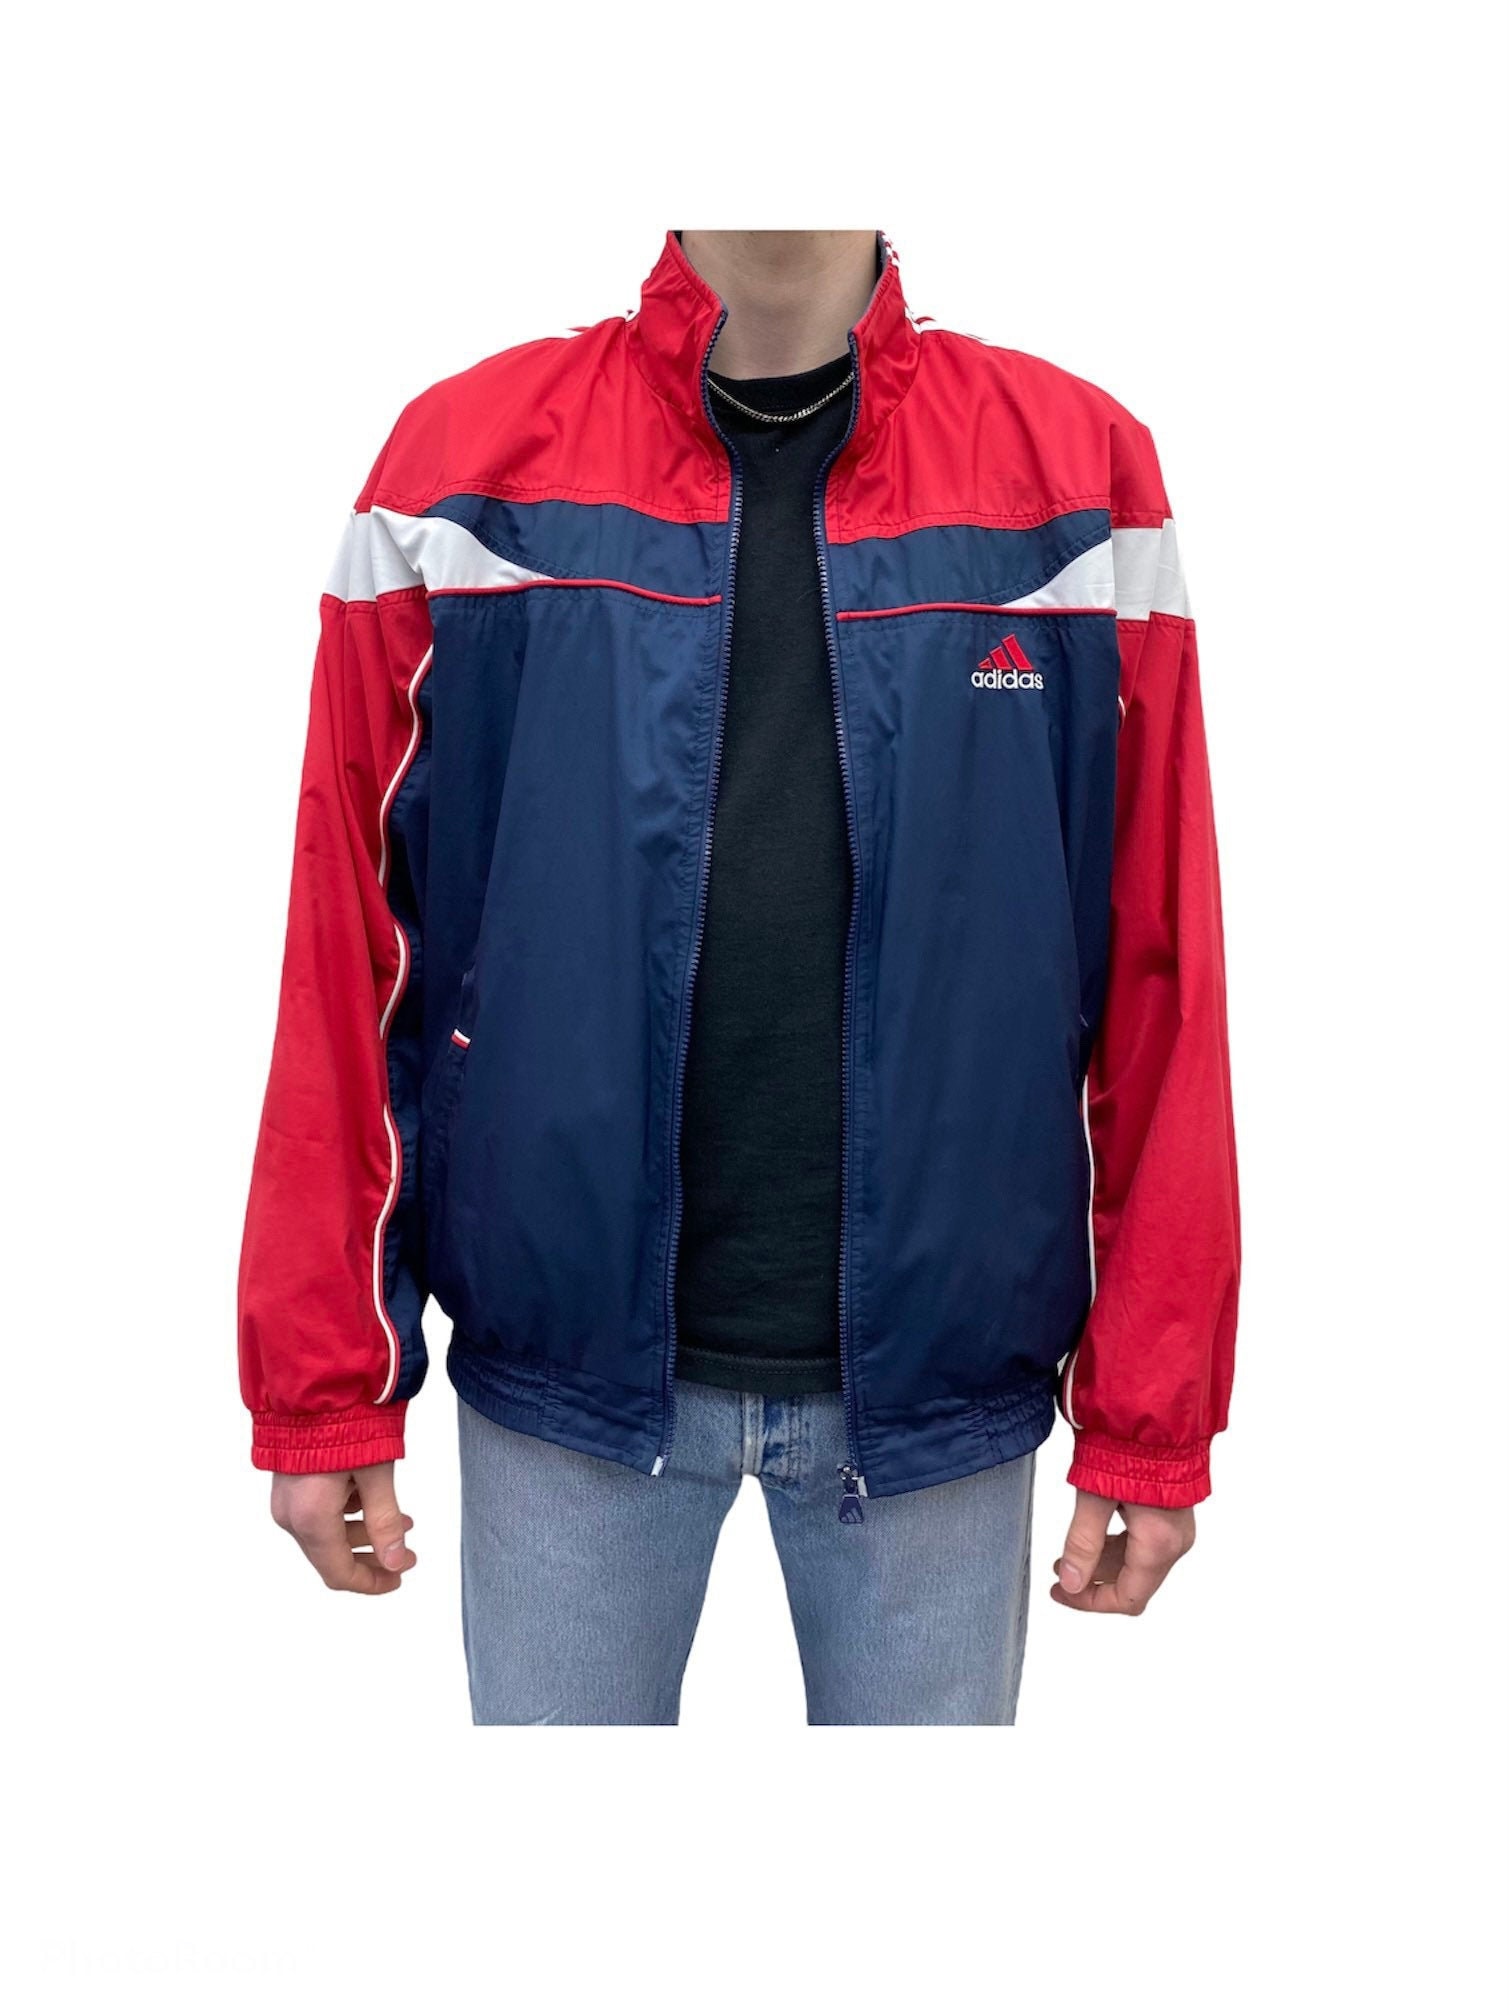 Adidas Windbreaker Sports Jacket in Navy and Red With Three - Etsy